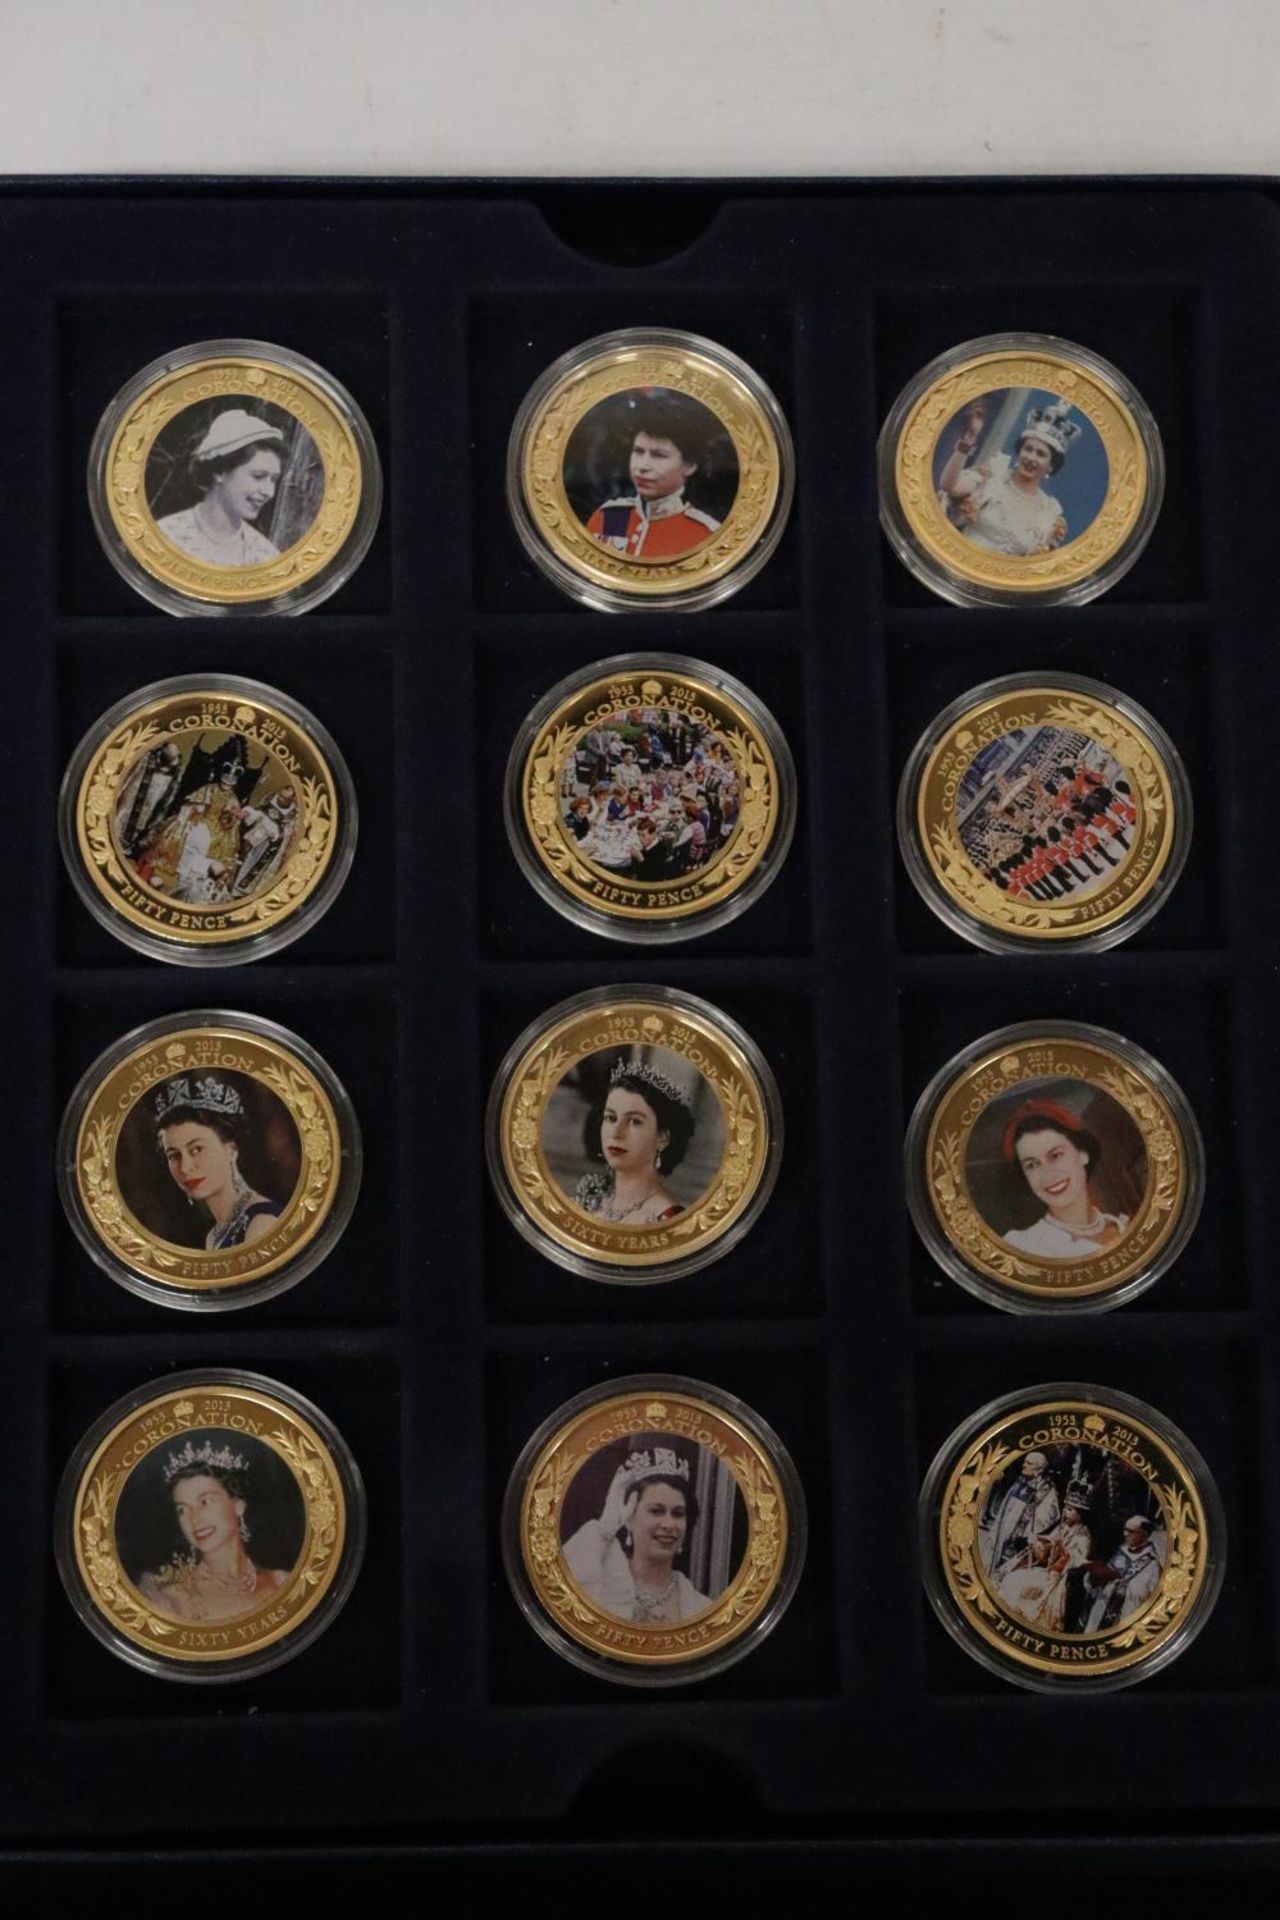 1953-2013 CORONATION JUBILEE OF HM QUEEN ELIZABETH 11, A SELECTION OF 16, 24 CARAT GOLD PLATED COINS - Image 2 of 5